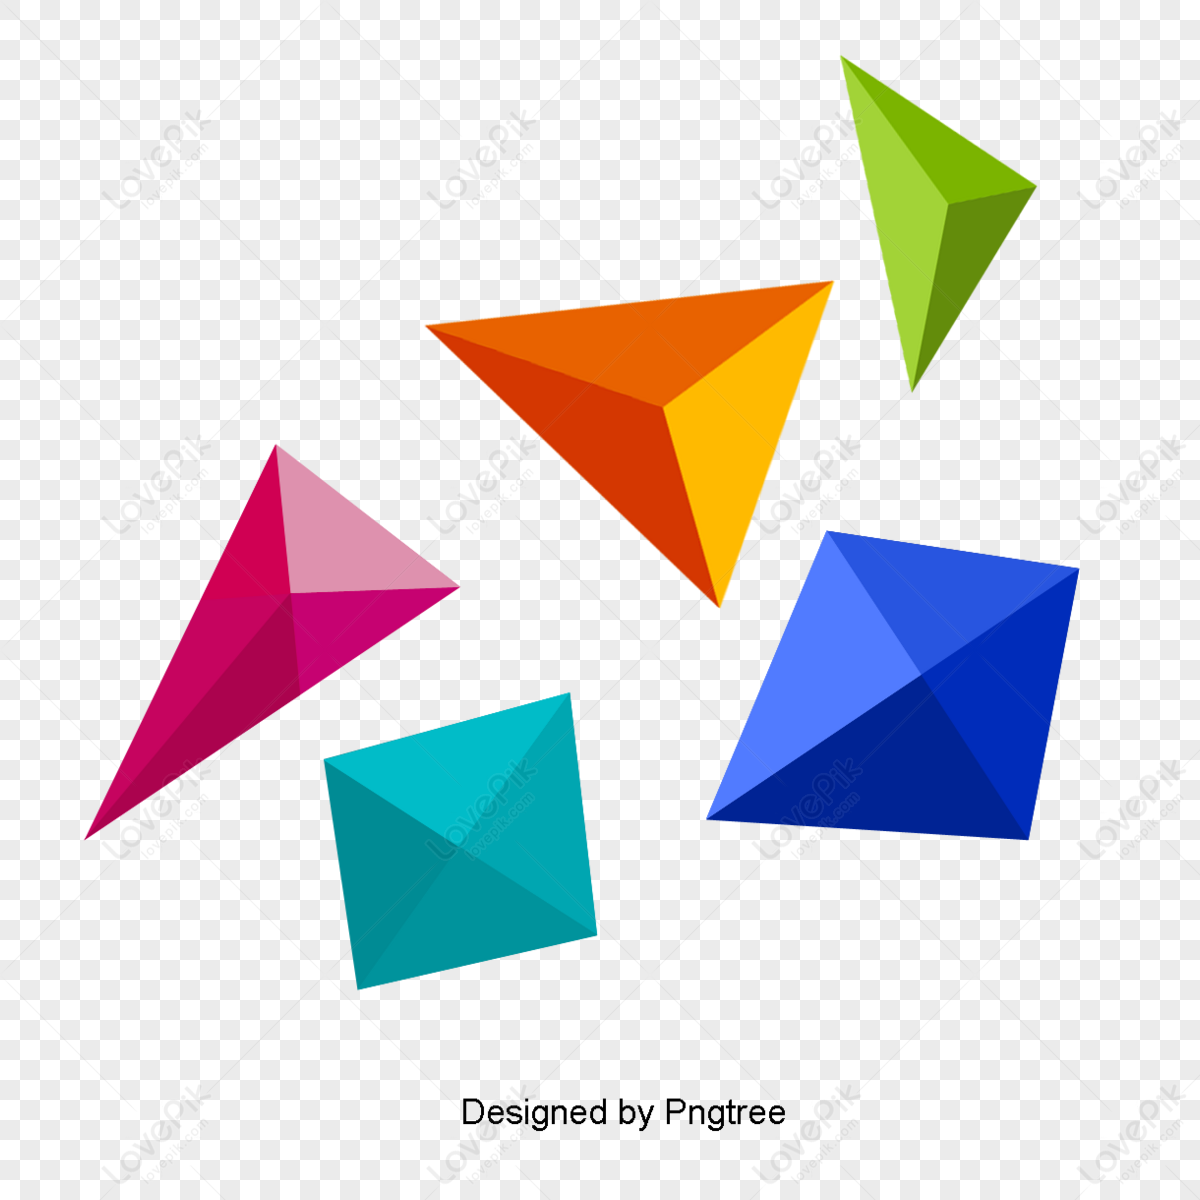 Geometric Shape, Shapes, Cone Shape, Geometric Line PNG Image And Clipart  Image For Free Download - Lovepik